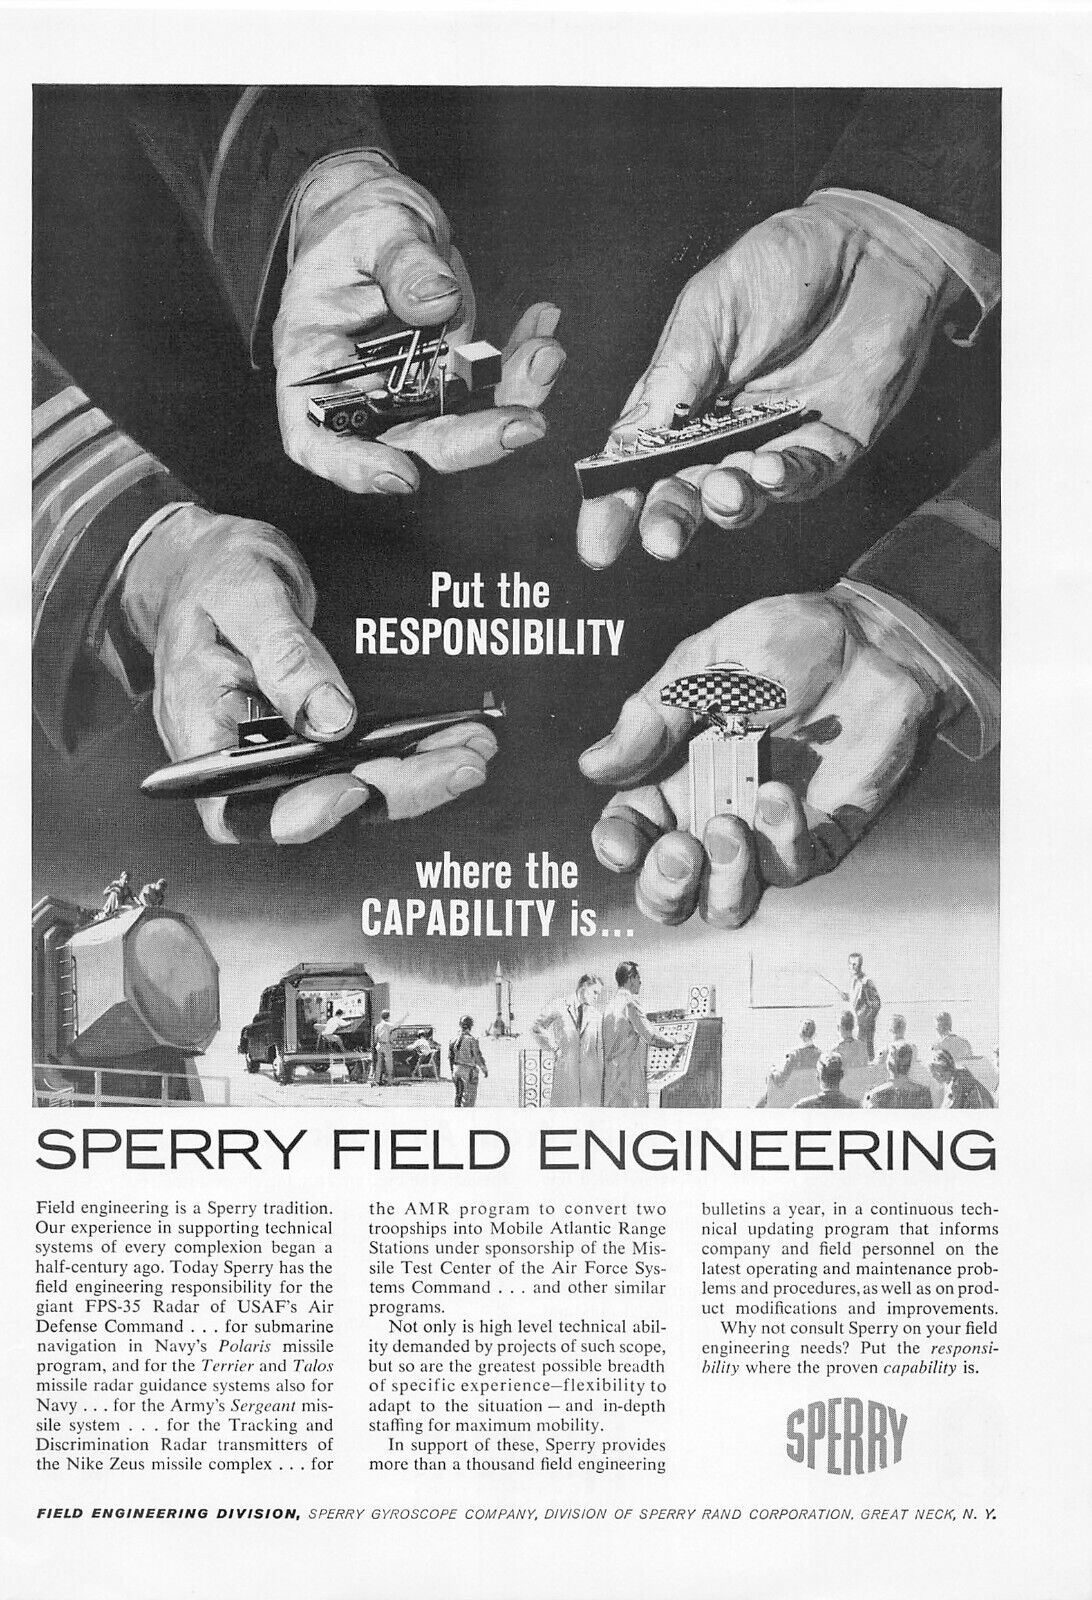 Polaris Missile Sperry Gyroscope Co Submarines Ships Aircraft Vintage Print Ad